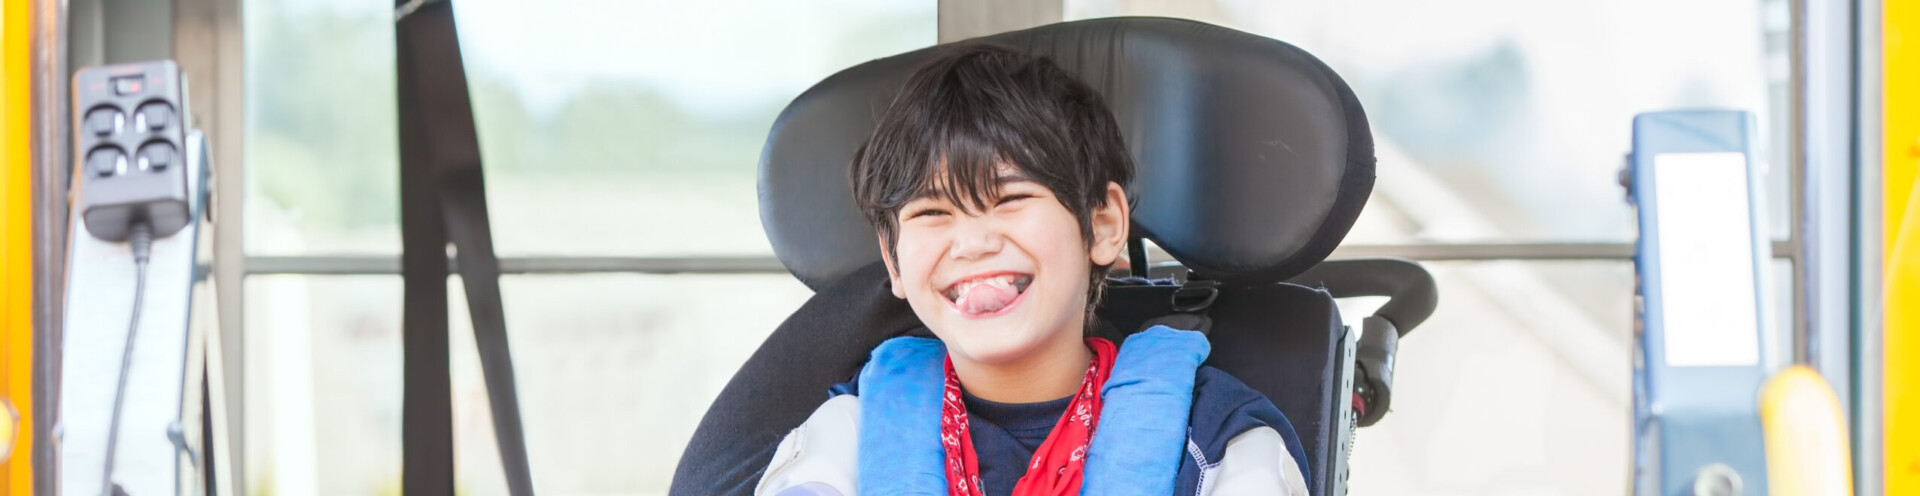 Photo of a boy smiling in an electric wheelchair, while on a bus